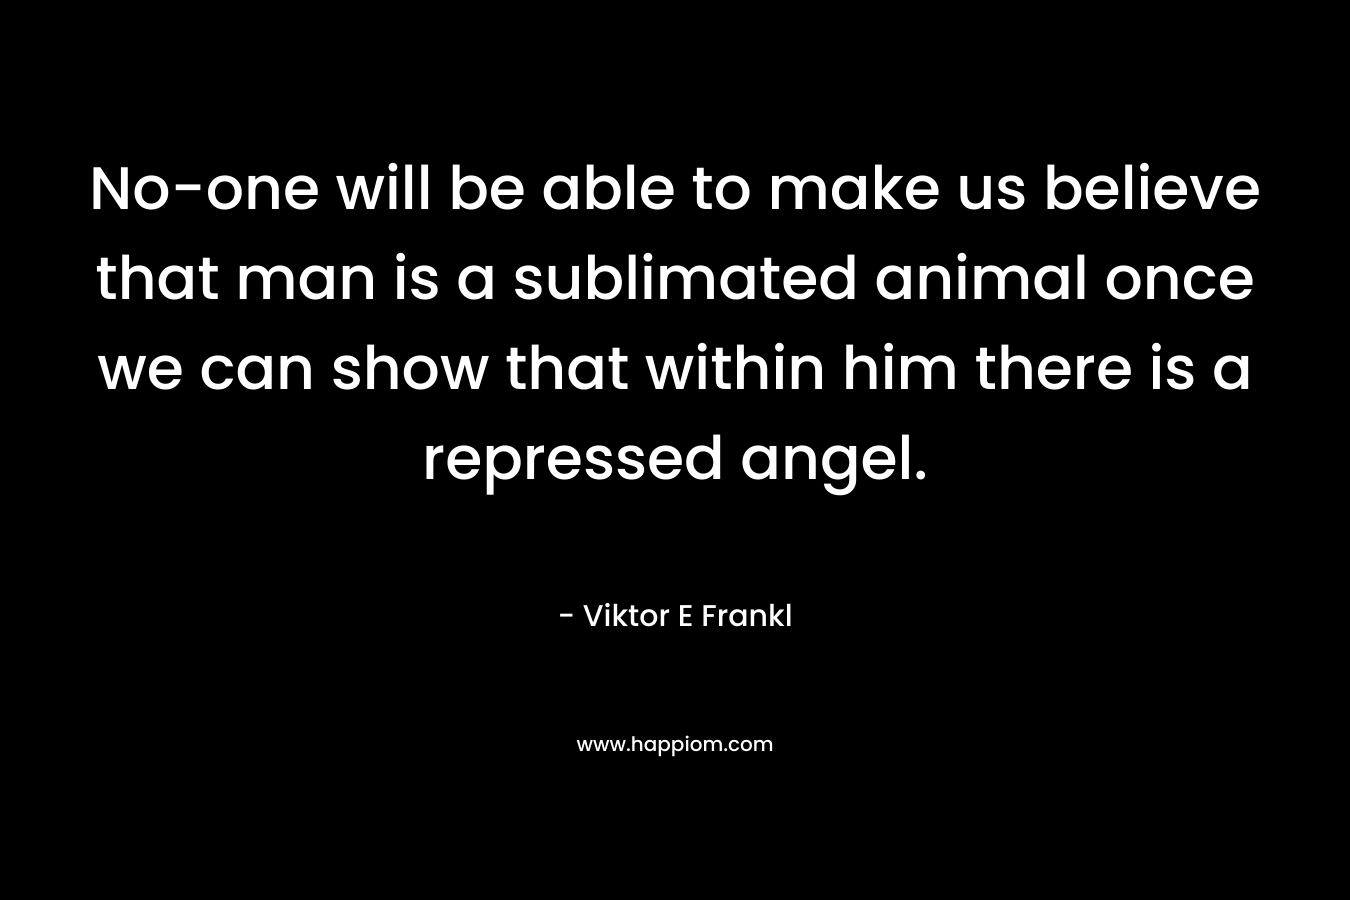 No-one will be able to make us believe that man is a sublimated animal once we can show that within him there is a repressed angel.